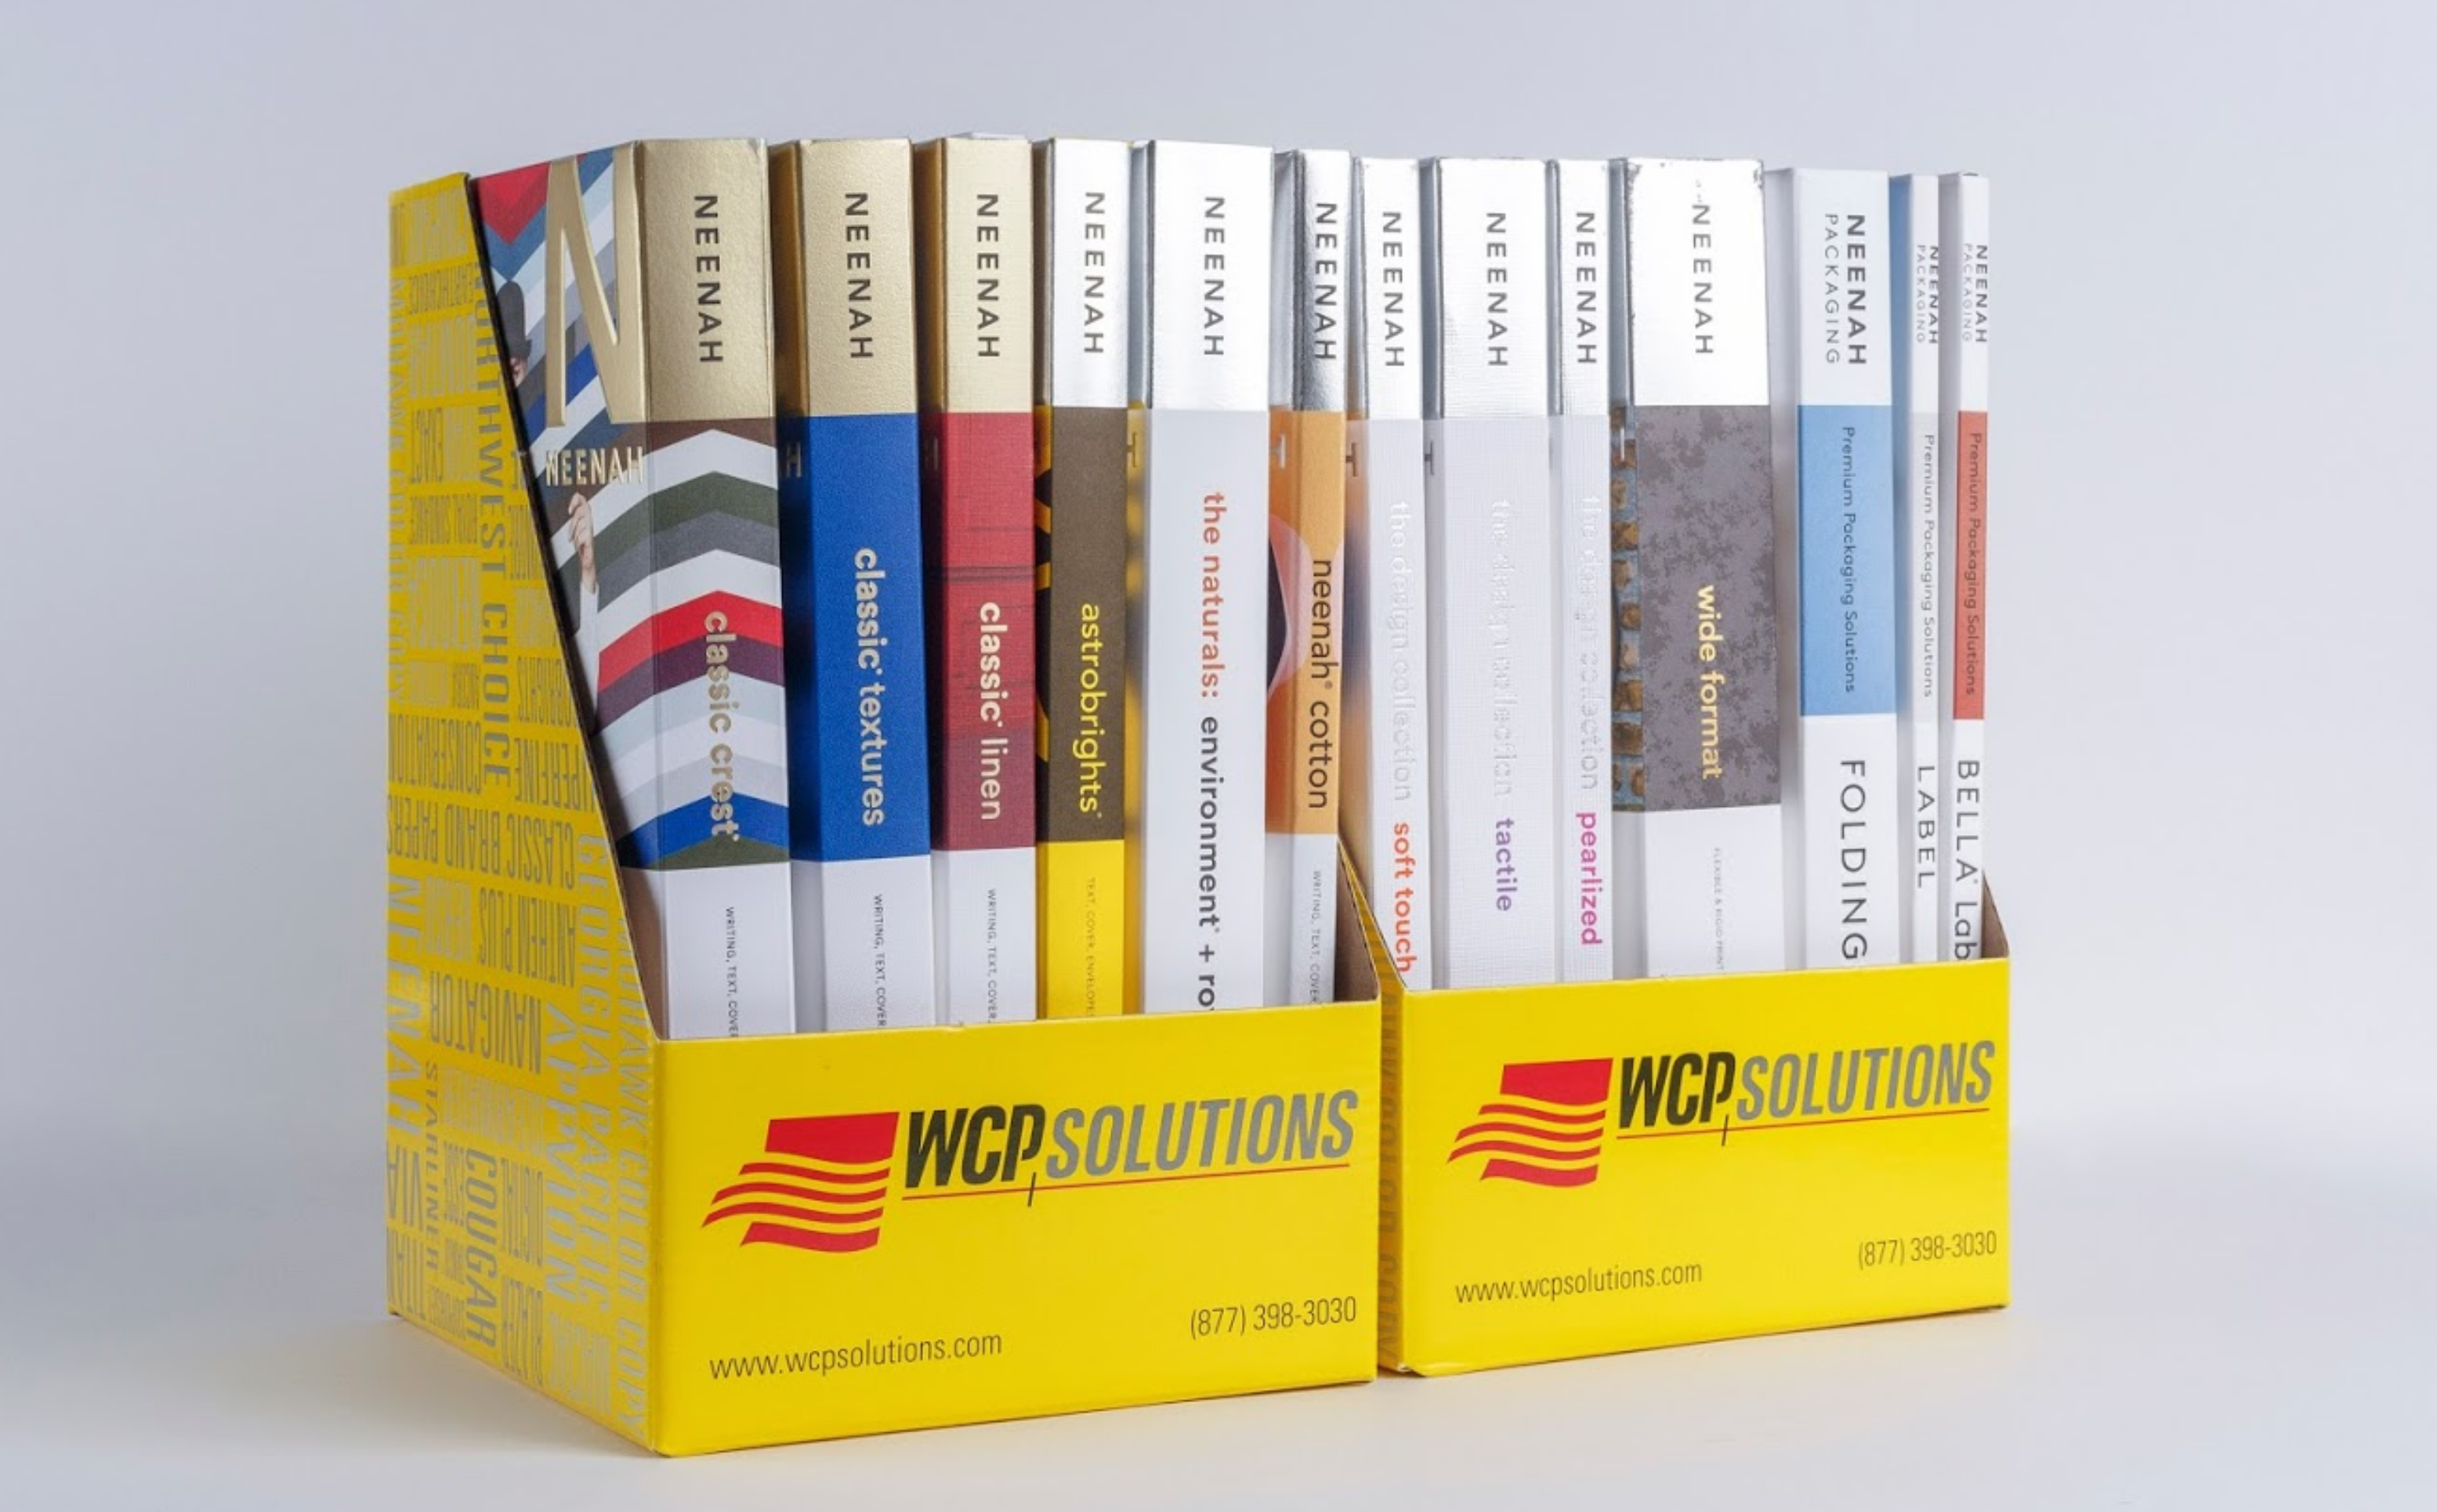 Neenah Paper Swatch Books from WCP Solutions